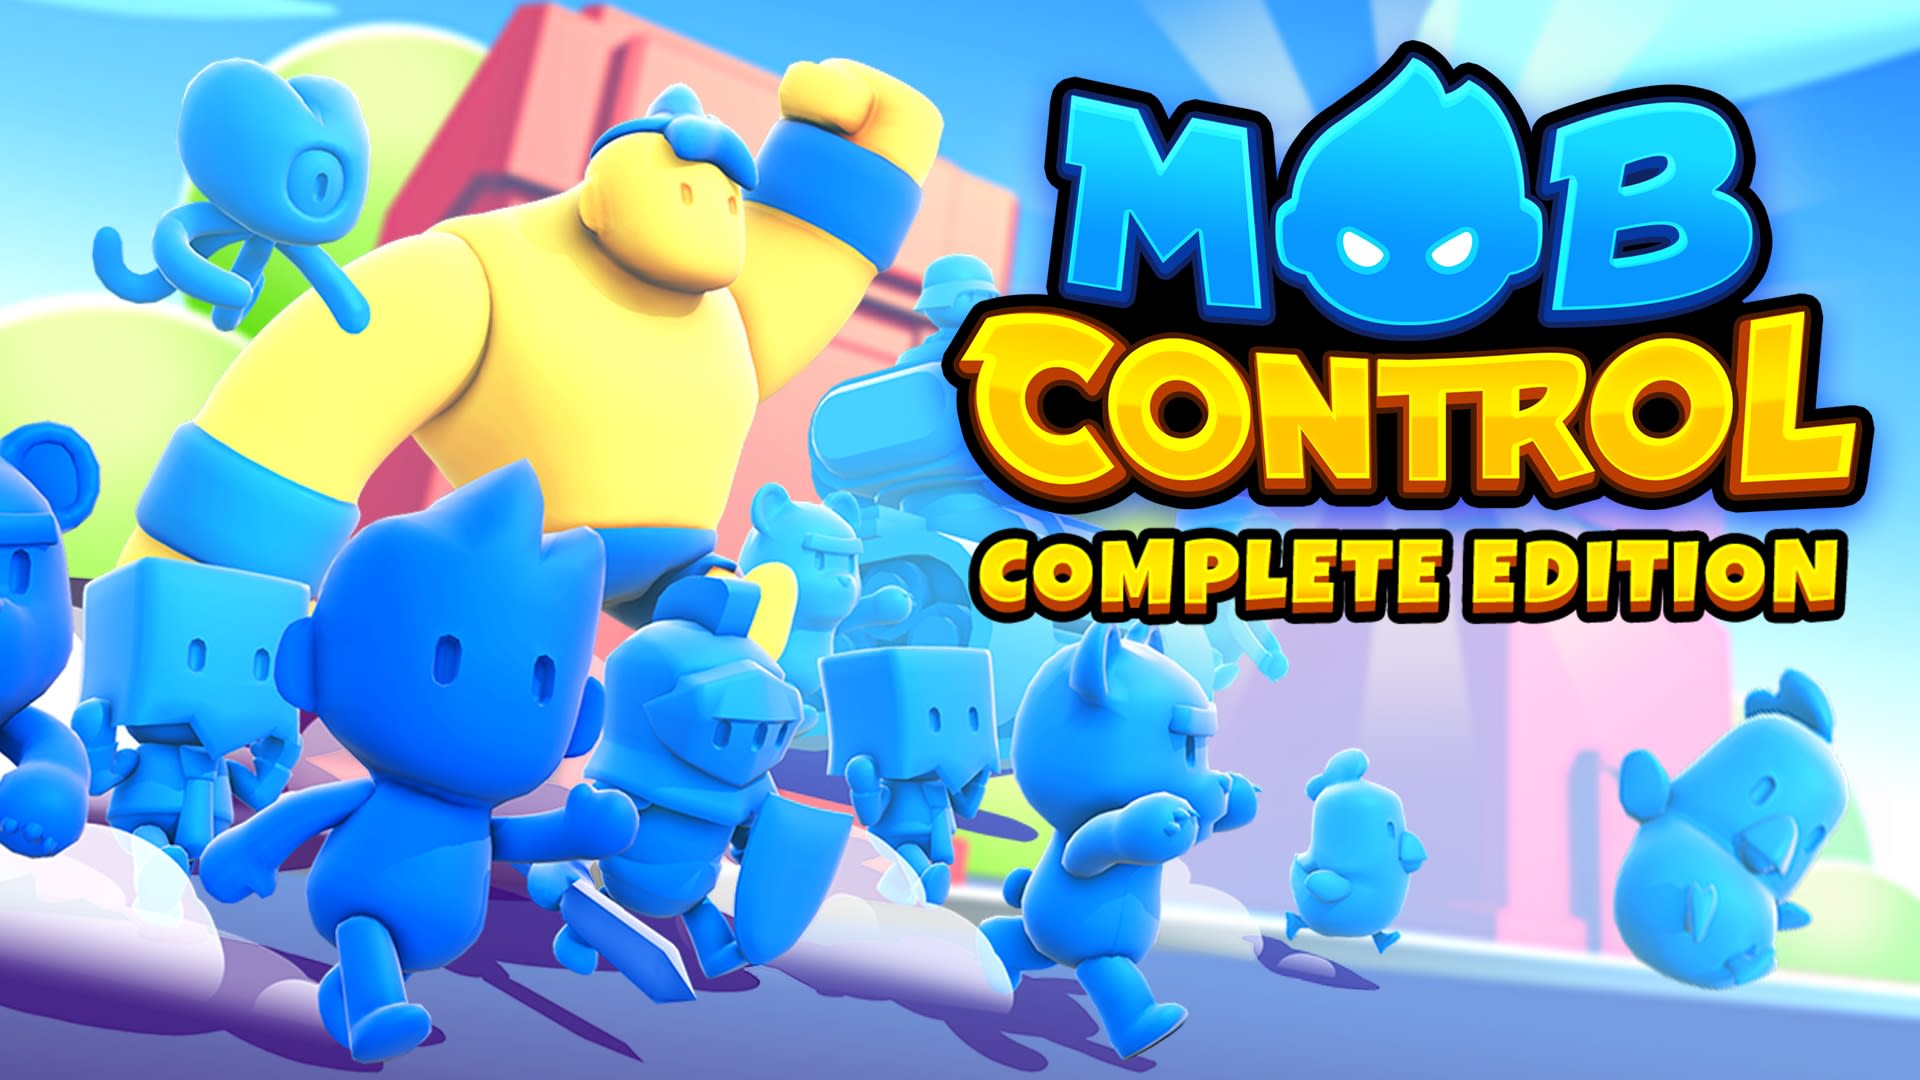 Mob Control: Complete Edition